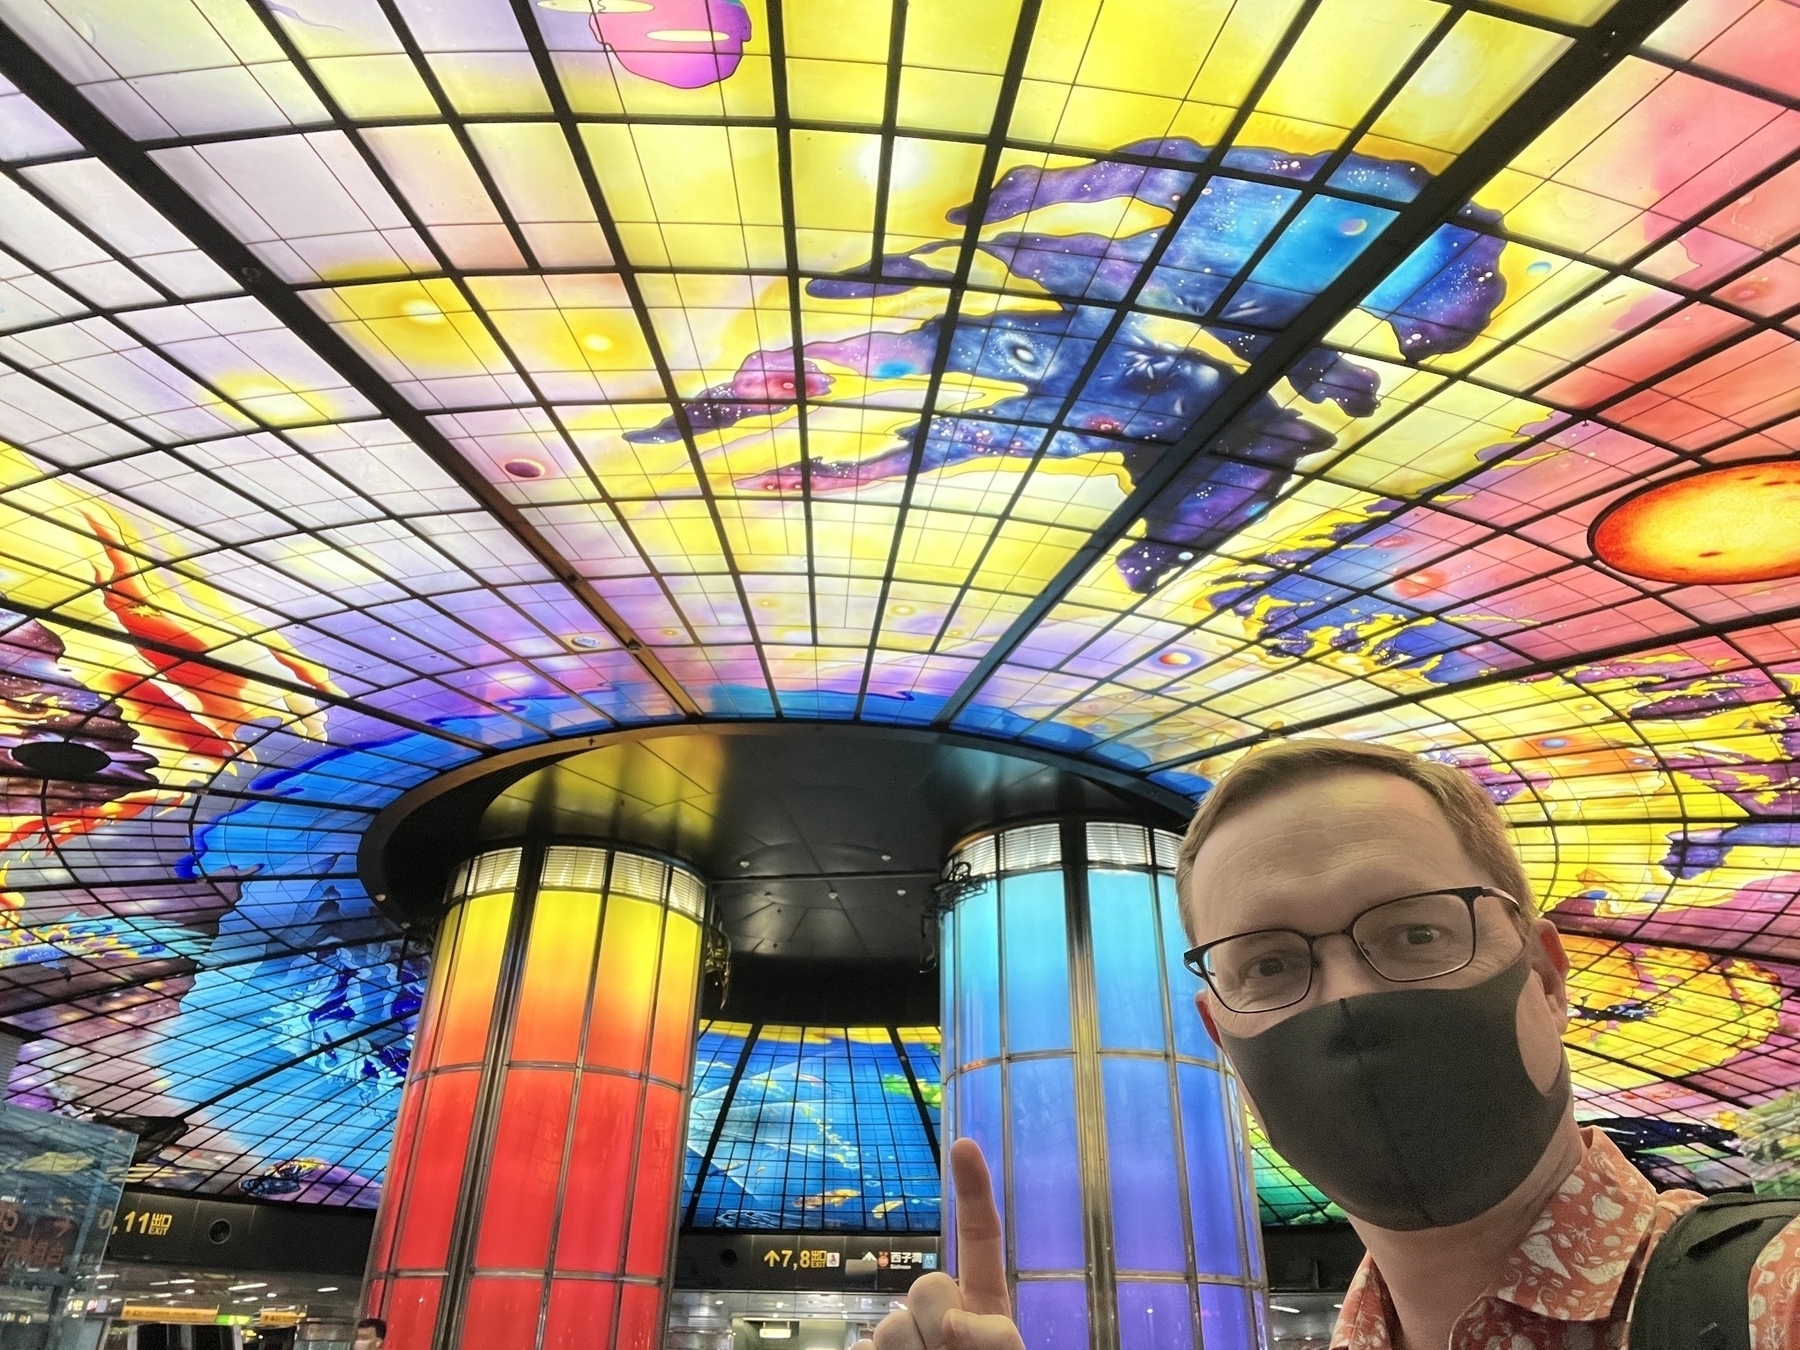 Chad selfie under the Dome of Light, a large coloured light installation at Formosa Station